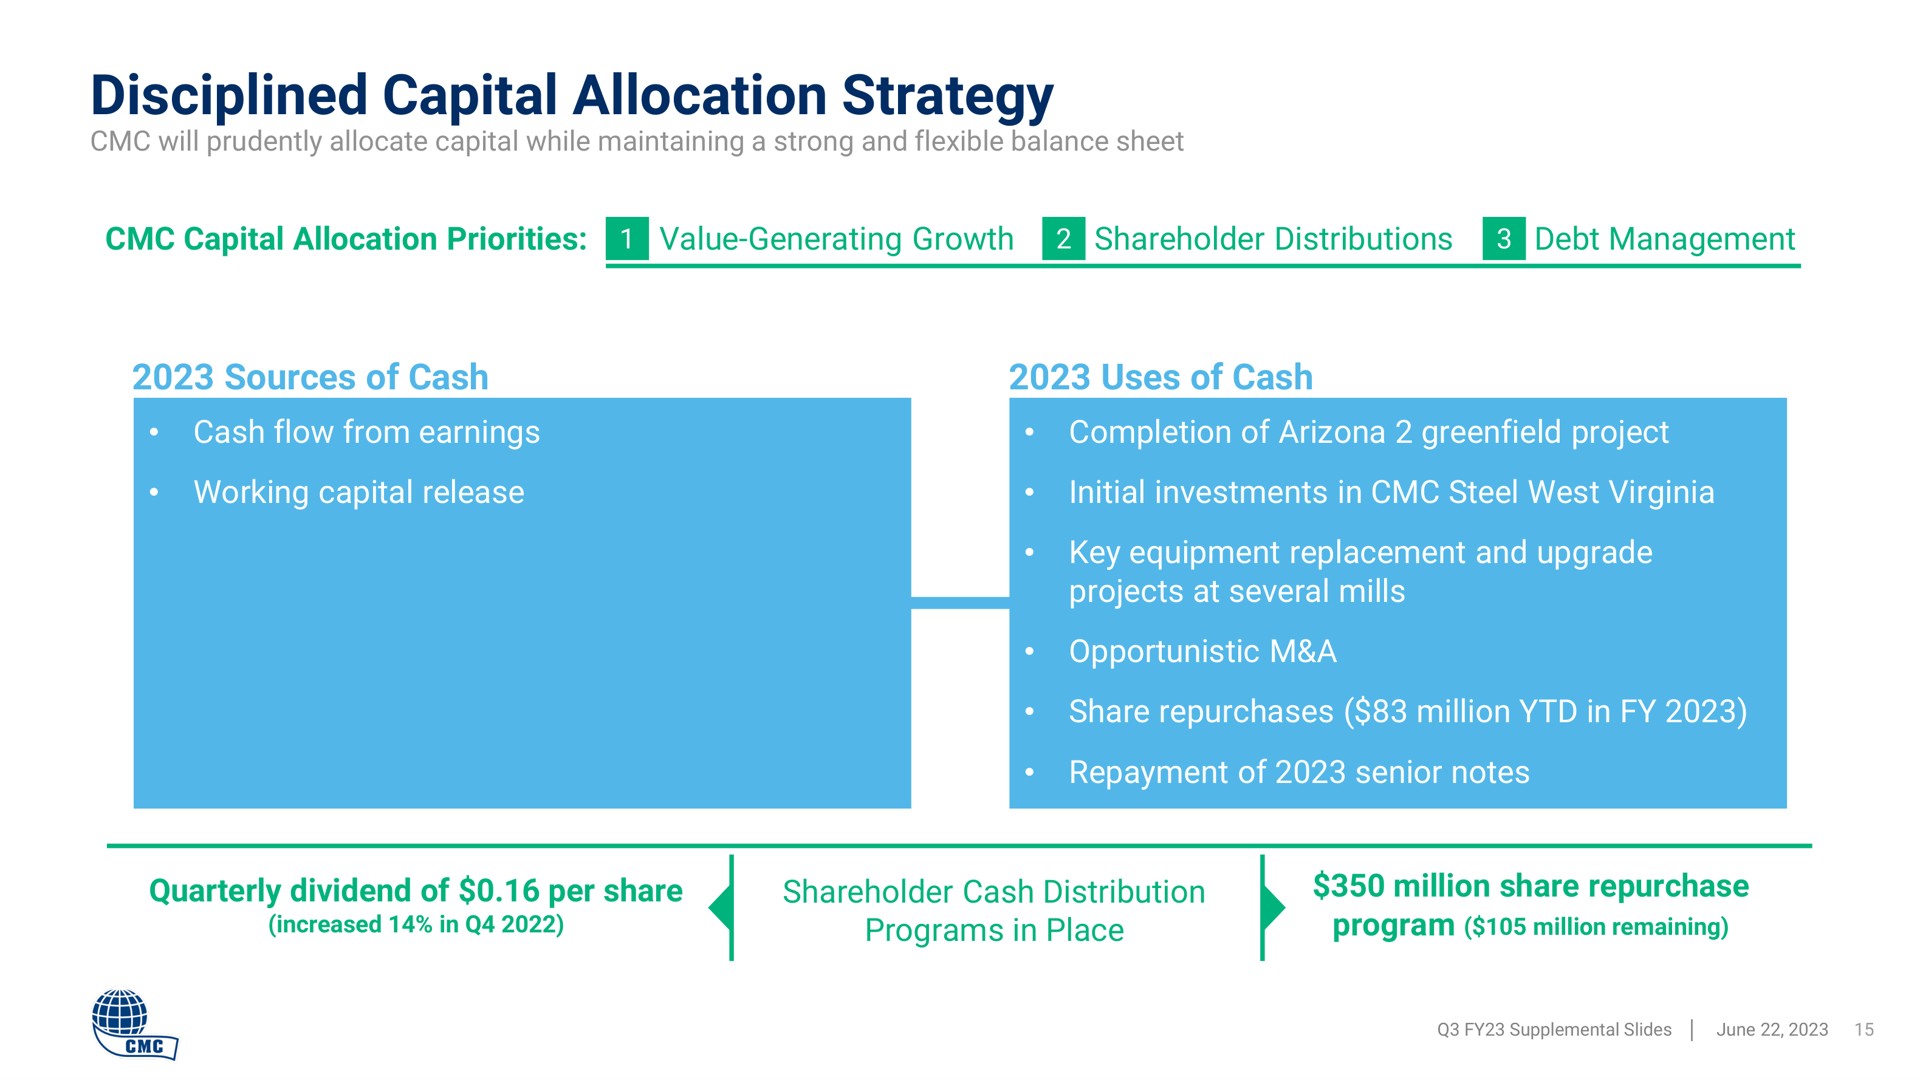 disciplined capital allocation strategy sources of cash uses of cash quarterly dividend per share shareholder distribution million share repurchase | Commercial Metals Company